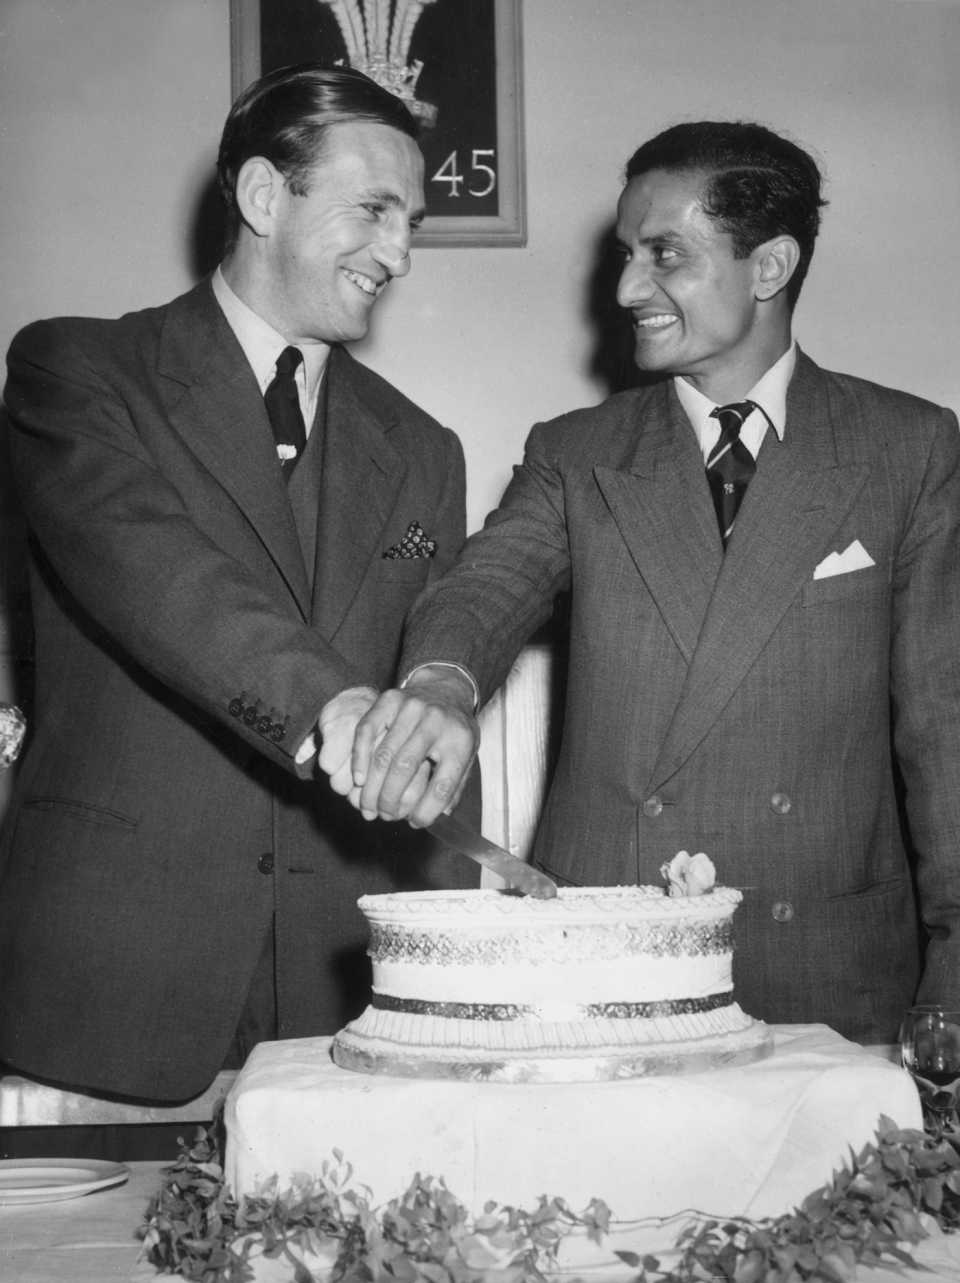 Len Hutton and Vijay Hazare cut a cake during a party at the Oval after drawing the final Test, day five, fourth Test, England v India, August 19, 1952